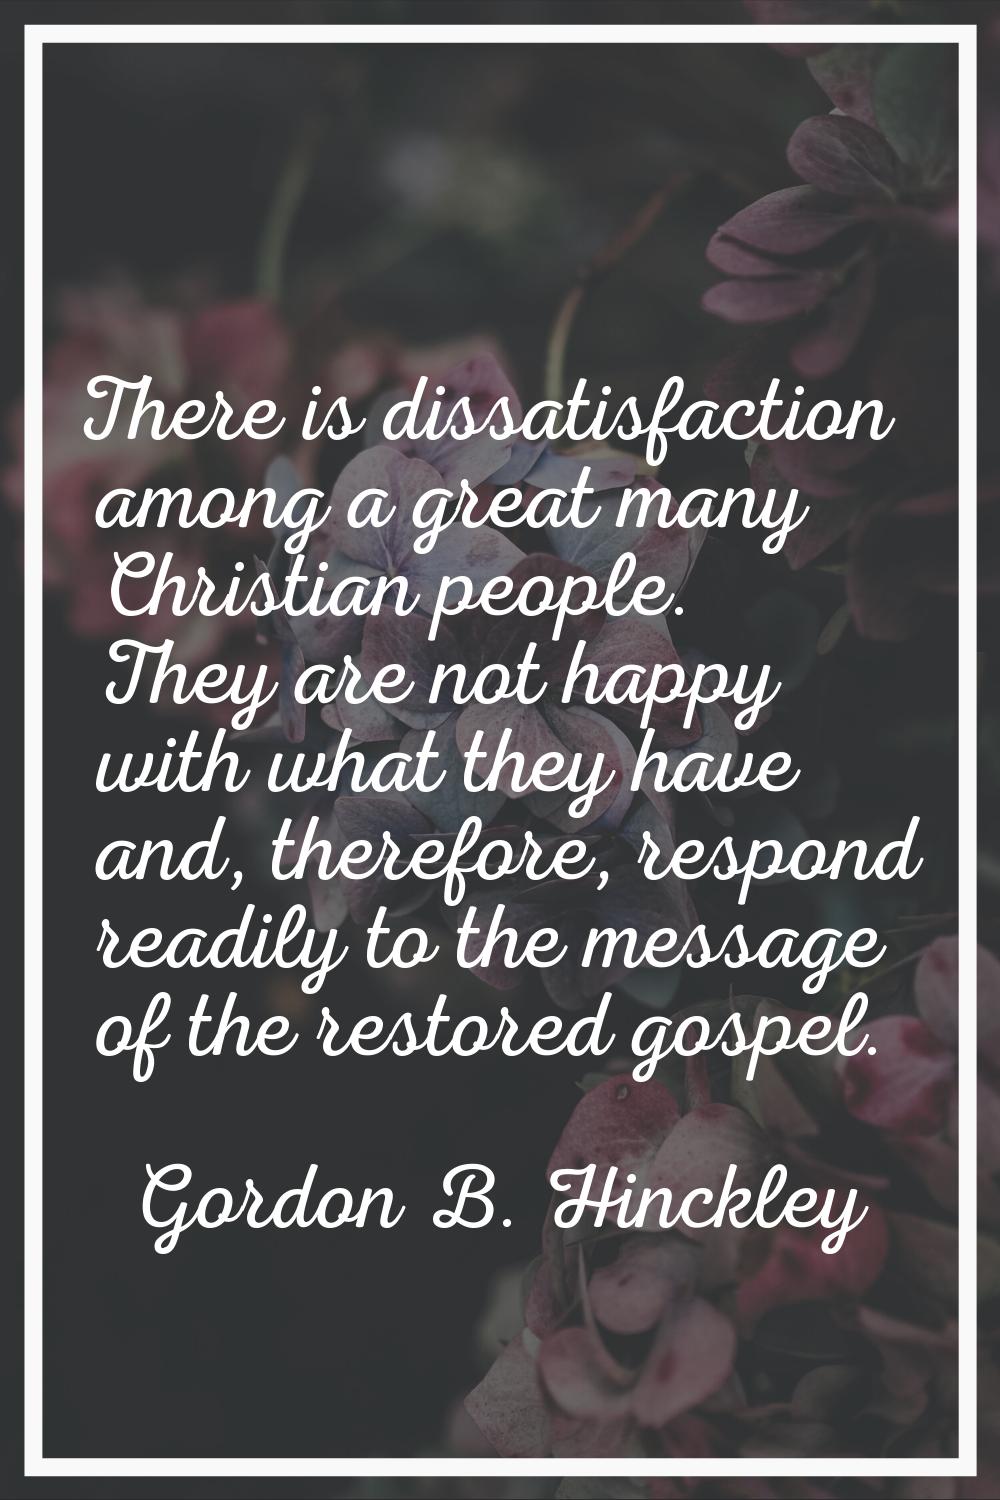 There is dissatisfaction among a great many Christian people. They are not happy with what they hav